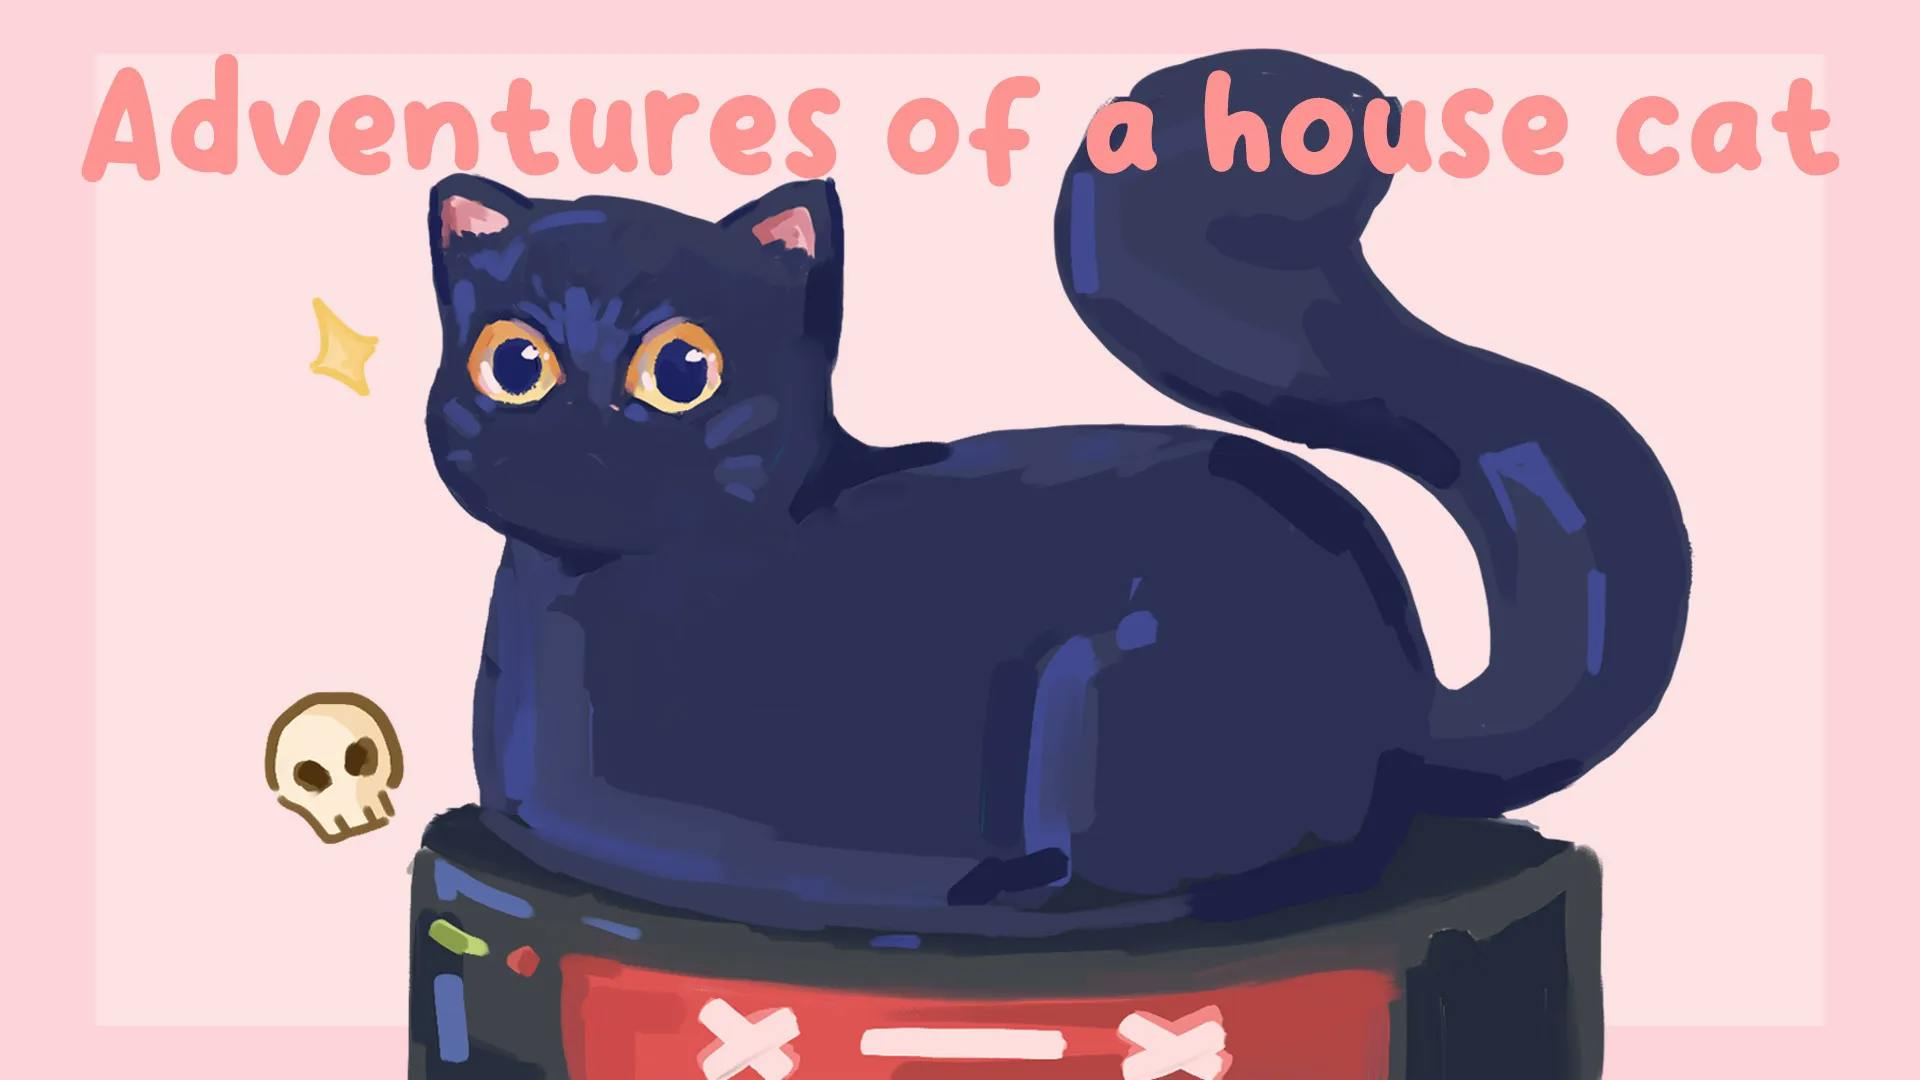 Adventures of a house cat